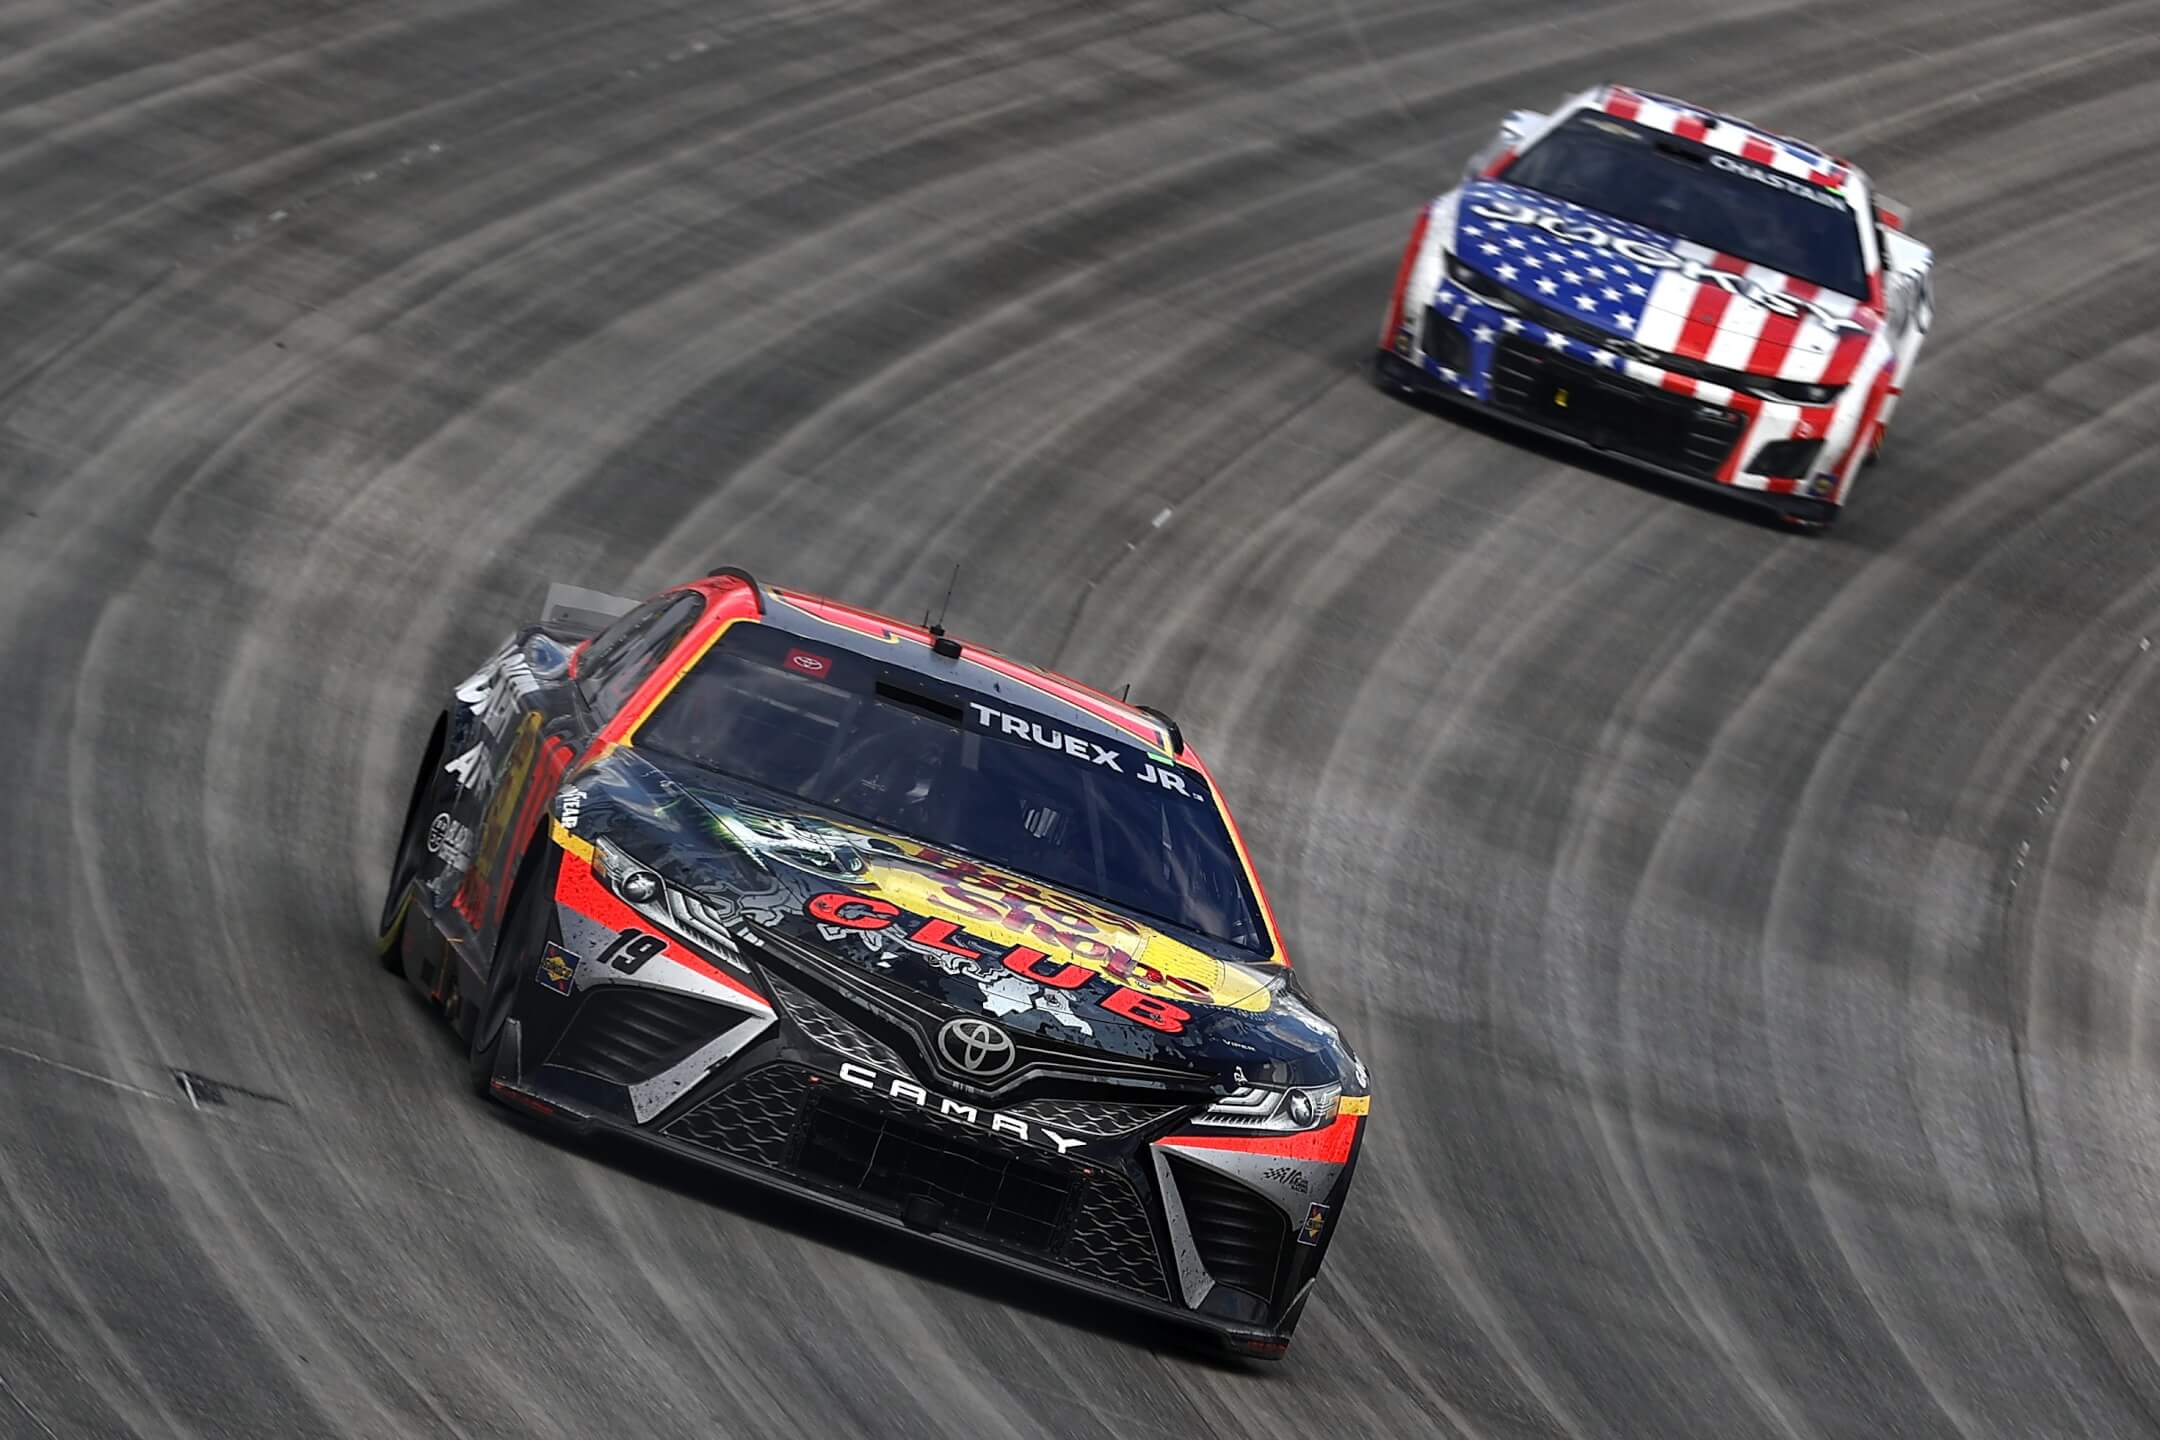 Martin Truex Jr., driver of the #19 Bass Pro Shops Toyota, and Ross Chastain, driver of the #1 Jockey Chevrolet, race during the NASCAR Cup Series Würth 400 at Dover International Speedway on May 01, 2023 in Dover, Delaware. (Photo by Tim Nwachukwu/Getty Images)